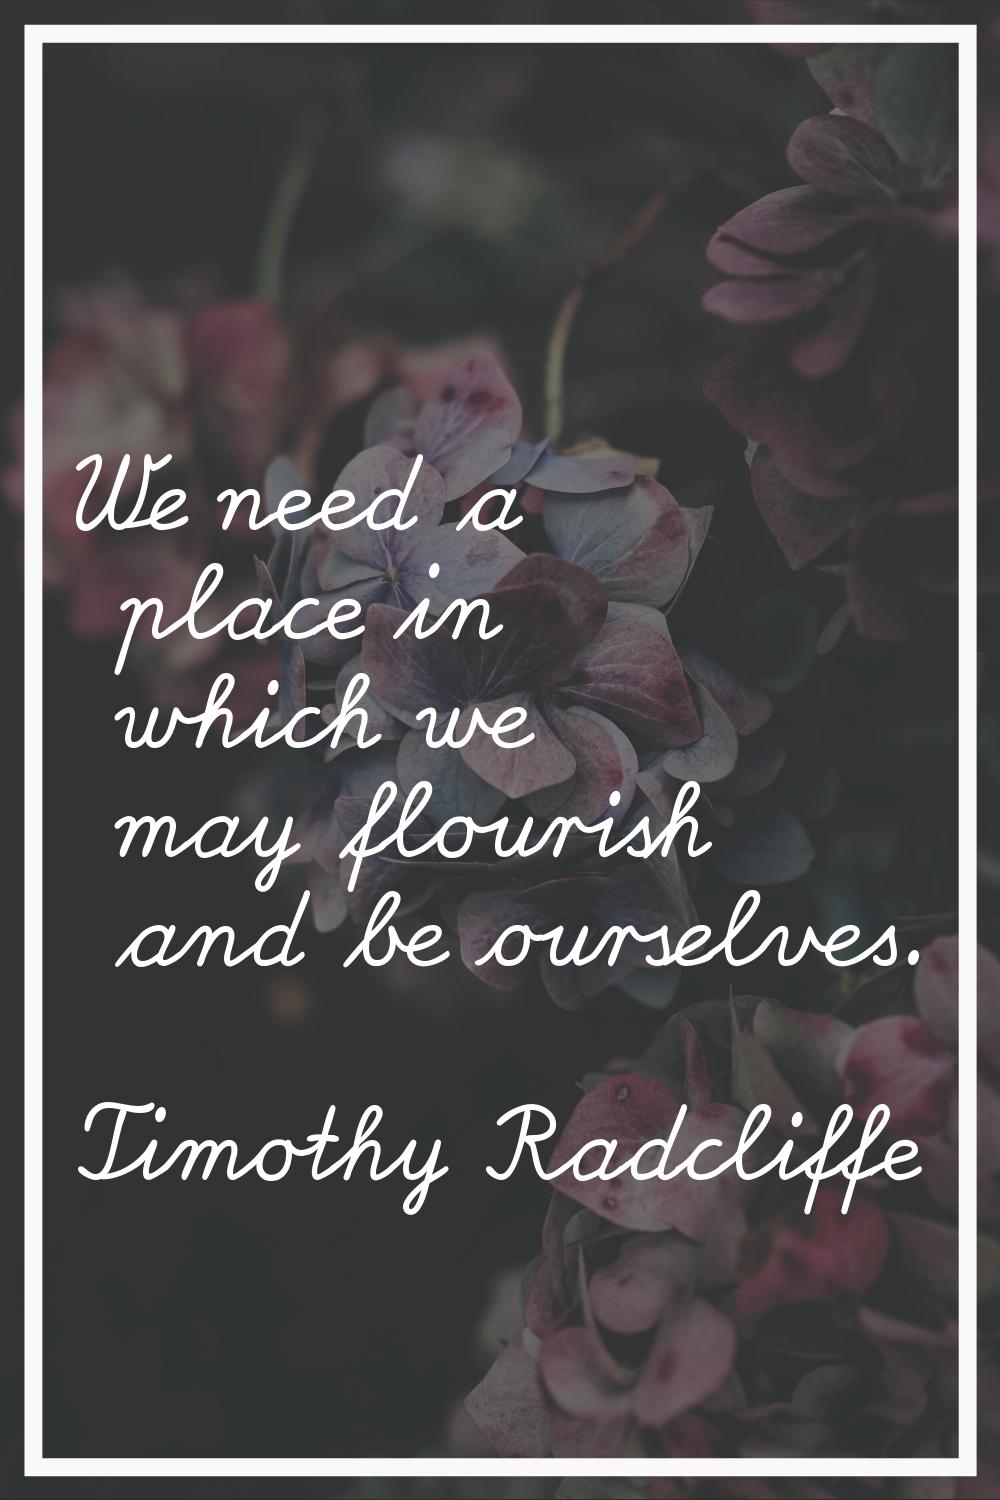 We need a place in which we may flourish and be ourselves.